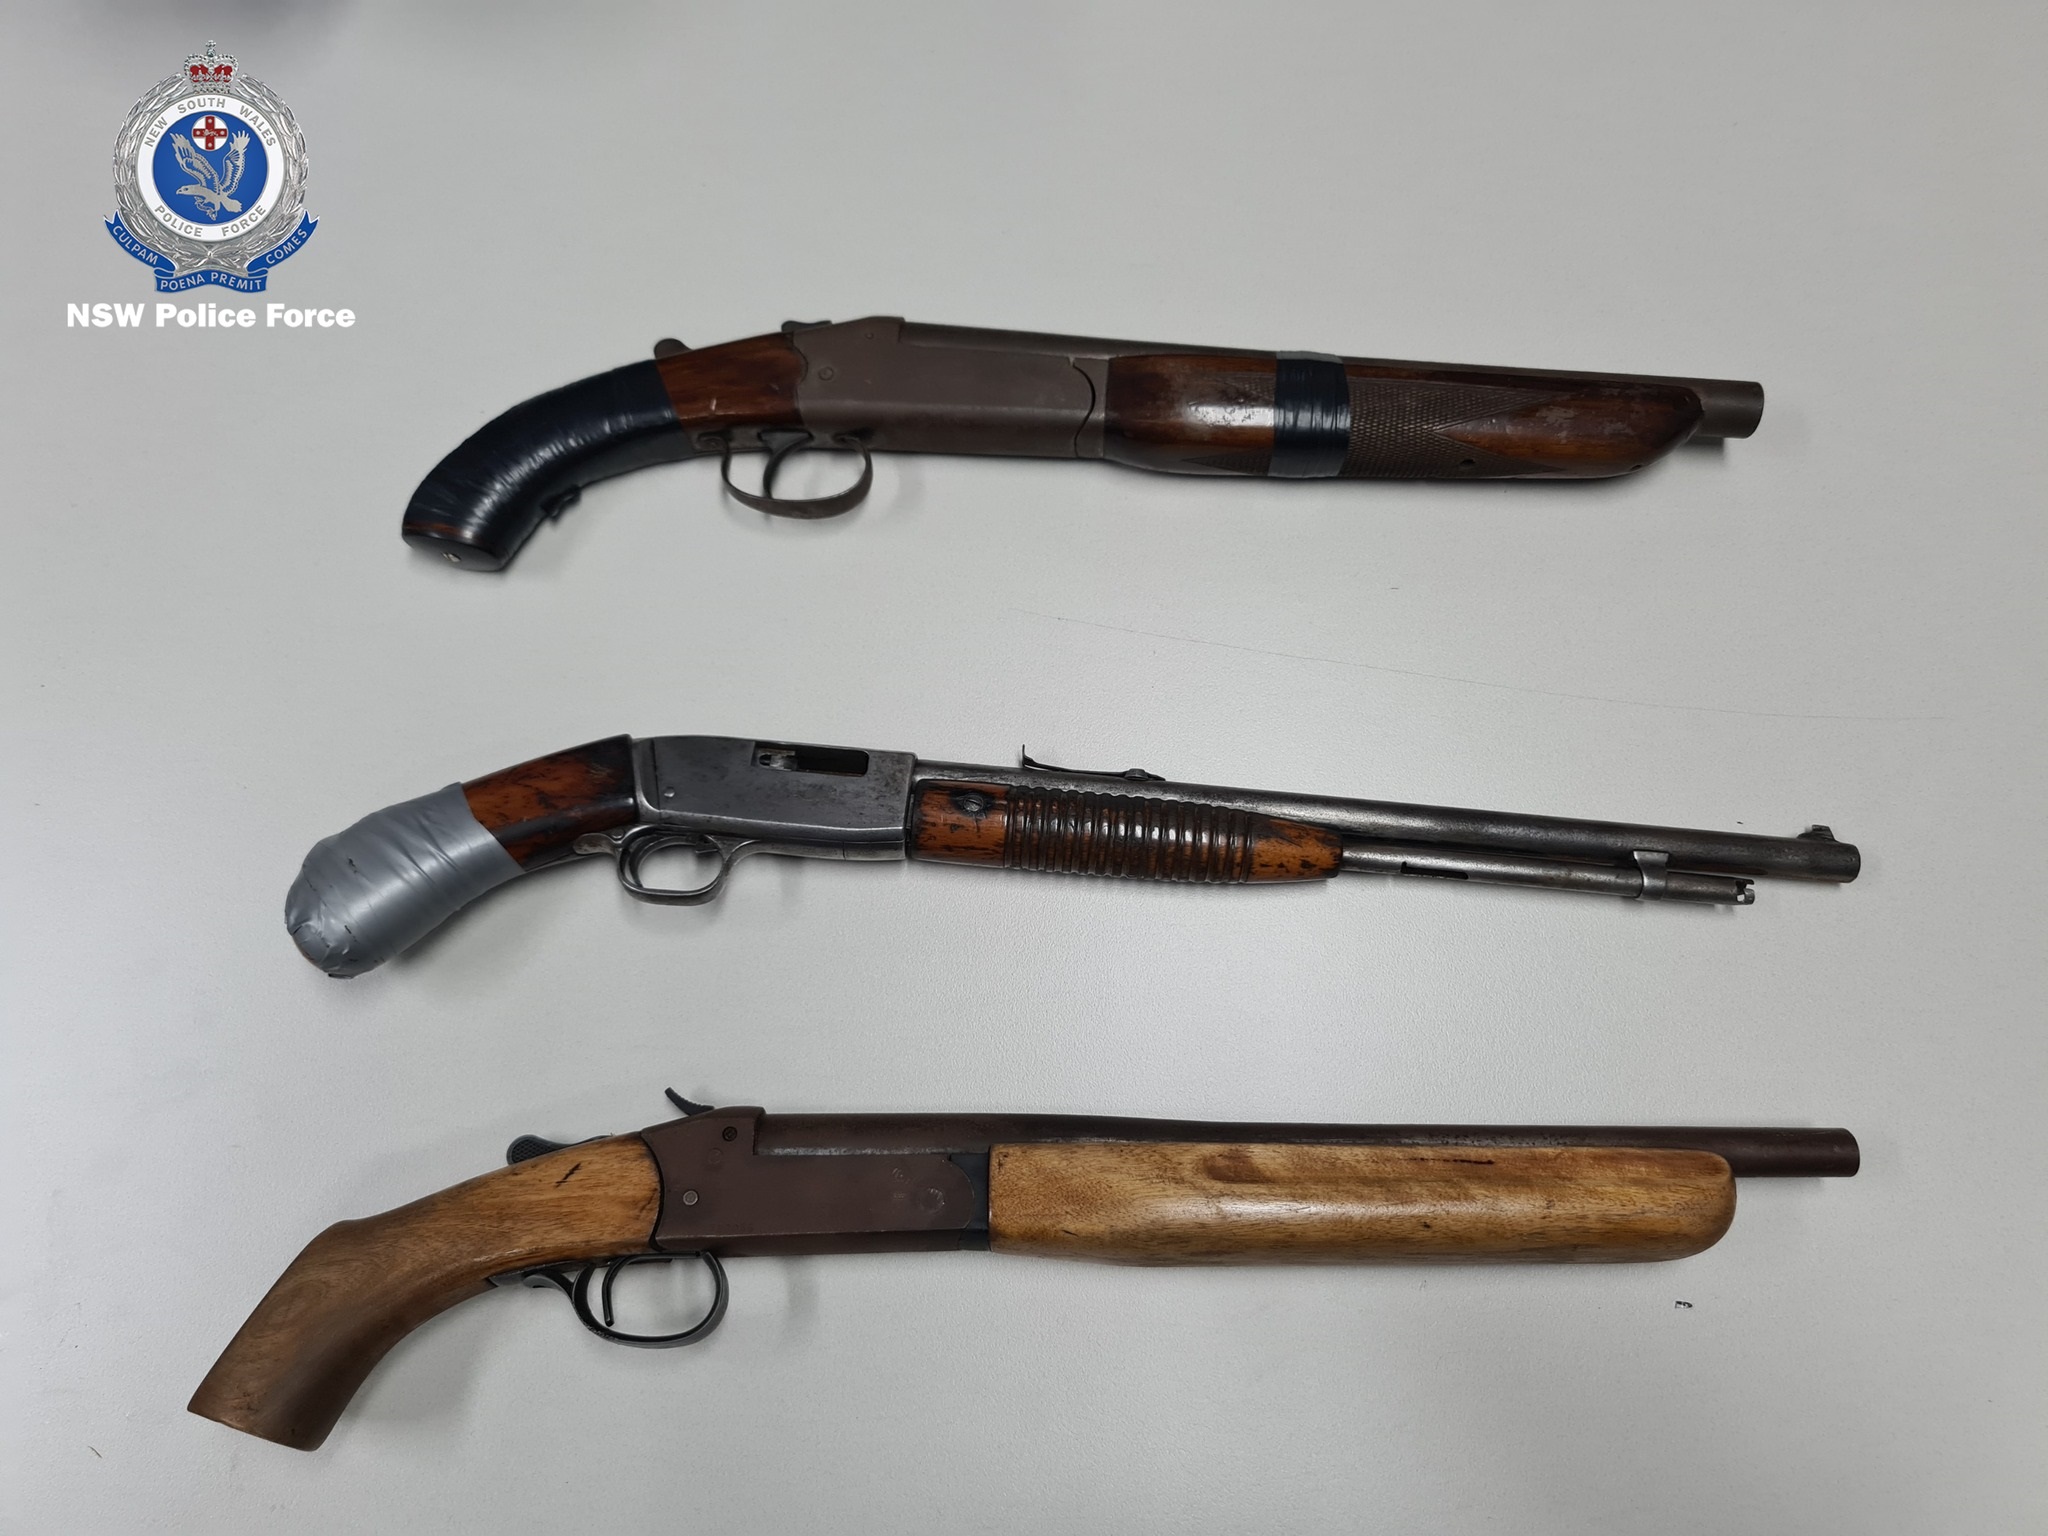 Multiple weapons found during highway vehicle stop